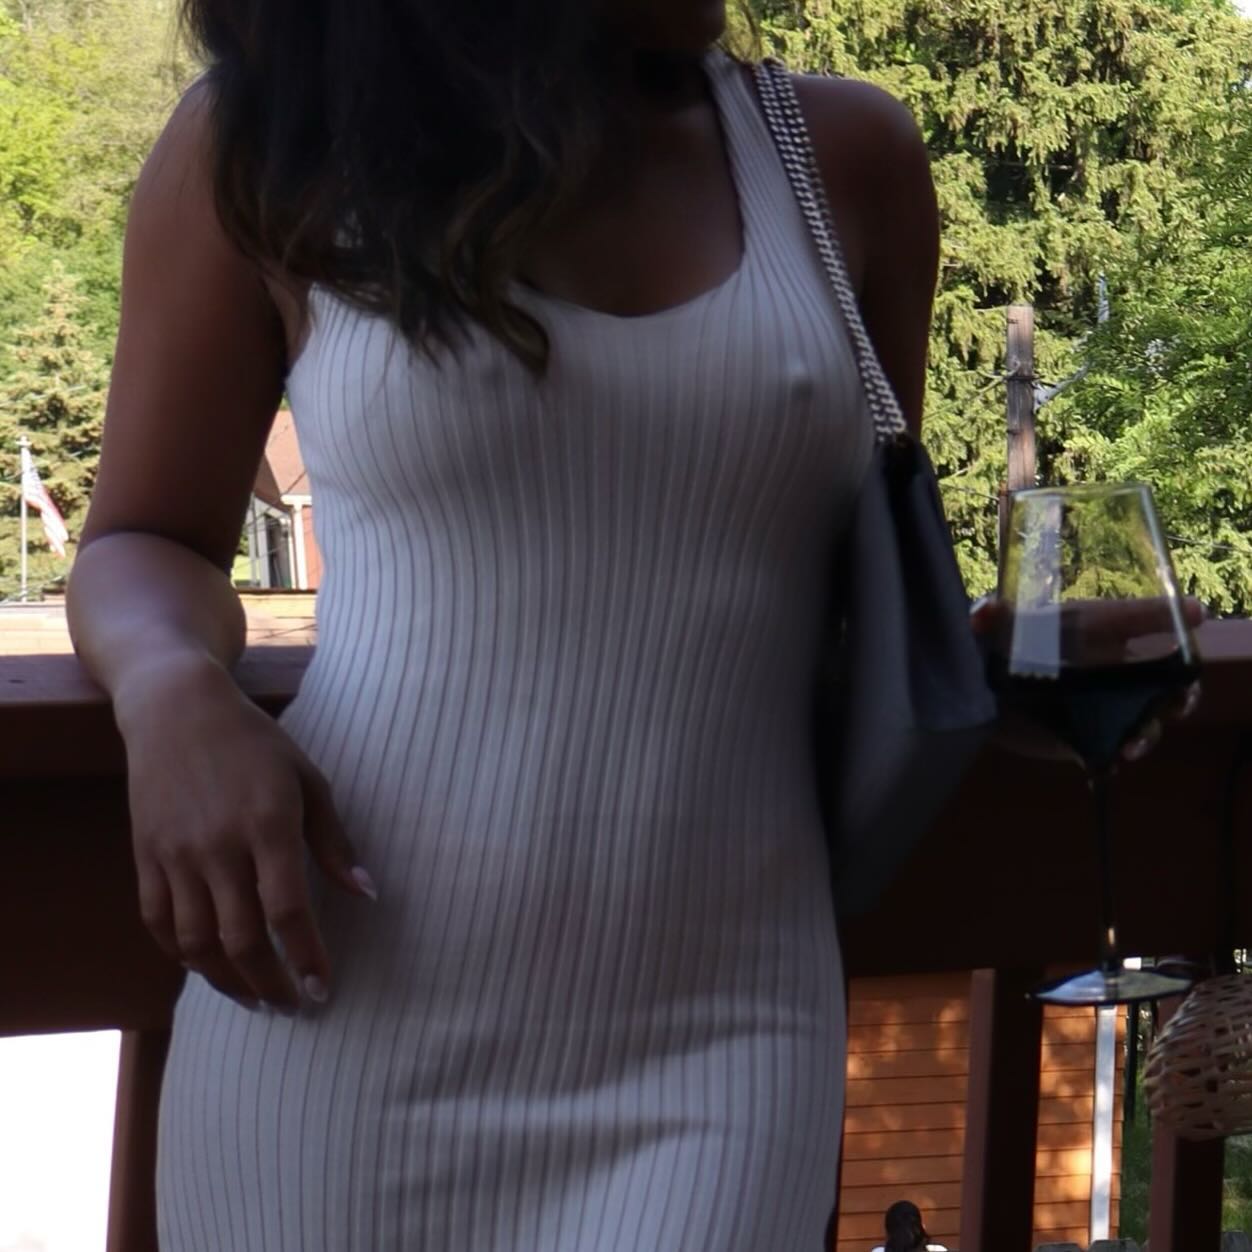 She posed in a tight white dress which showed off her nipples